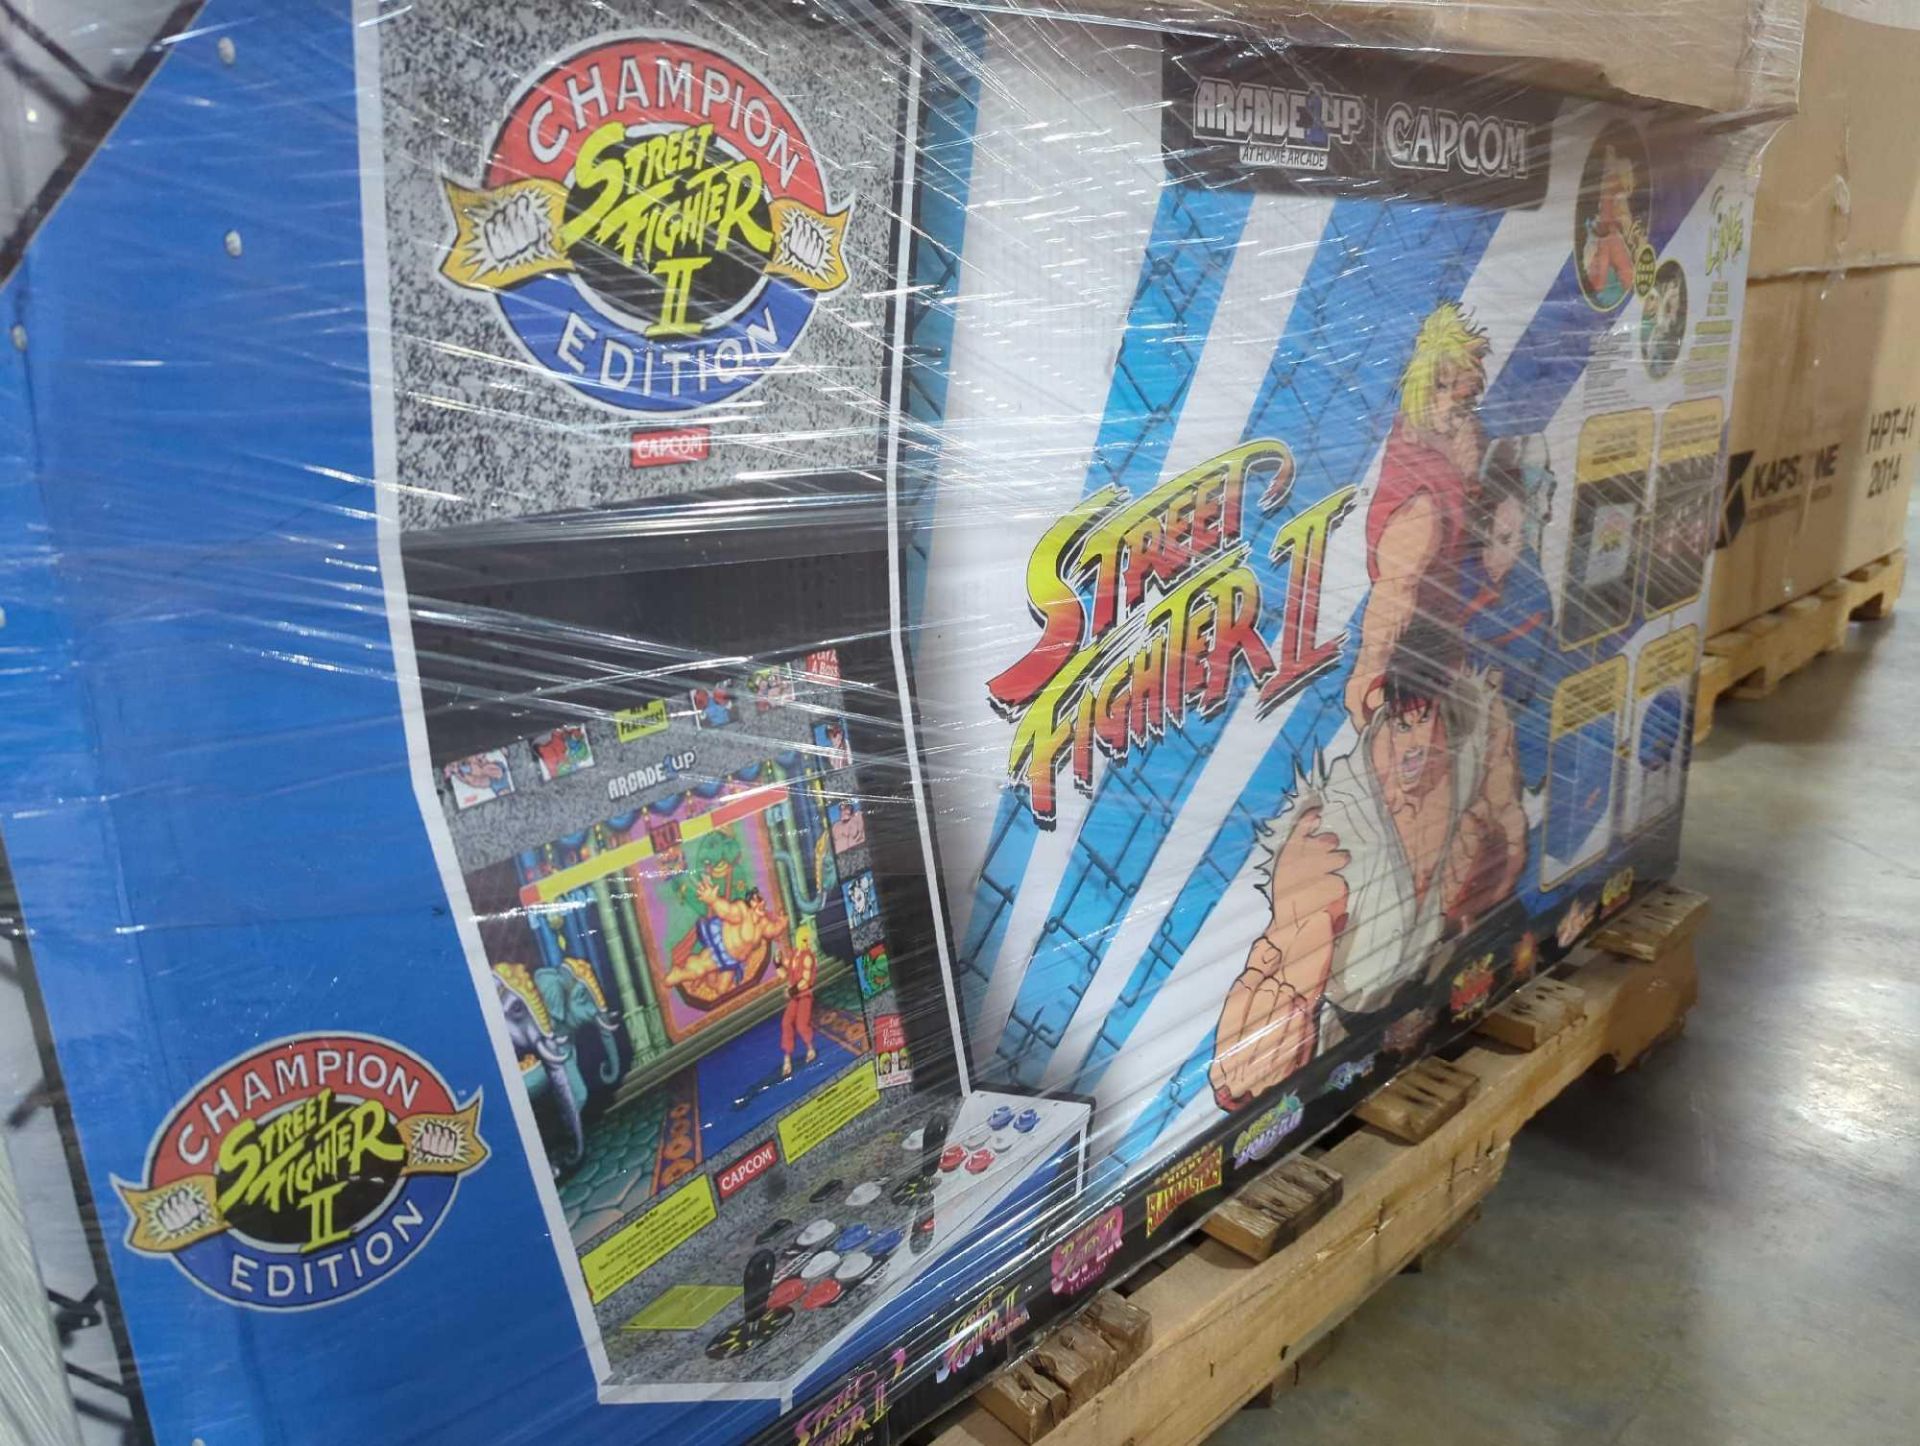 Street Fighter 2 Video Game and more